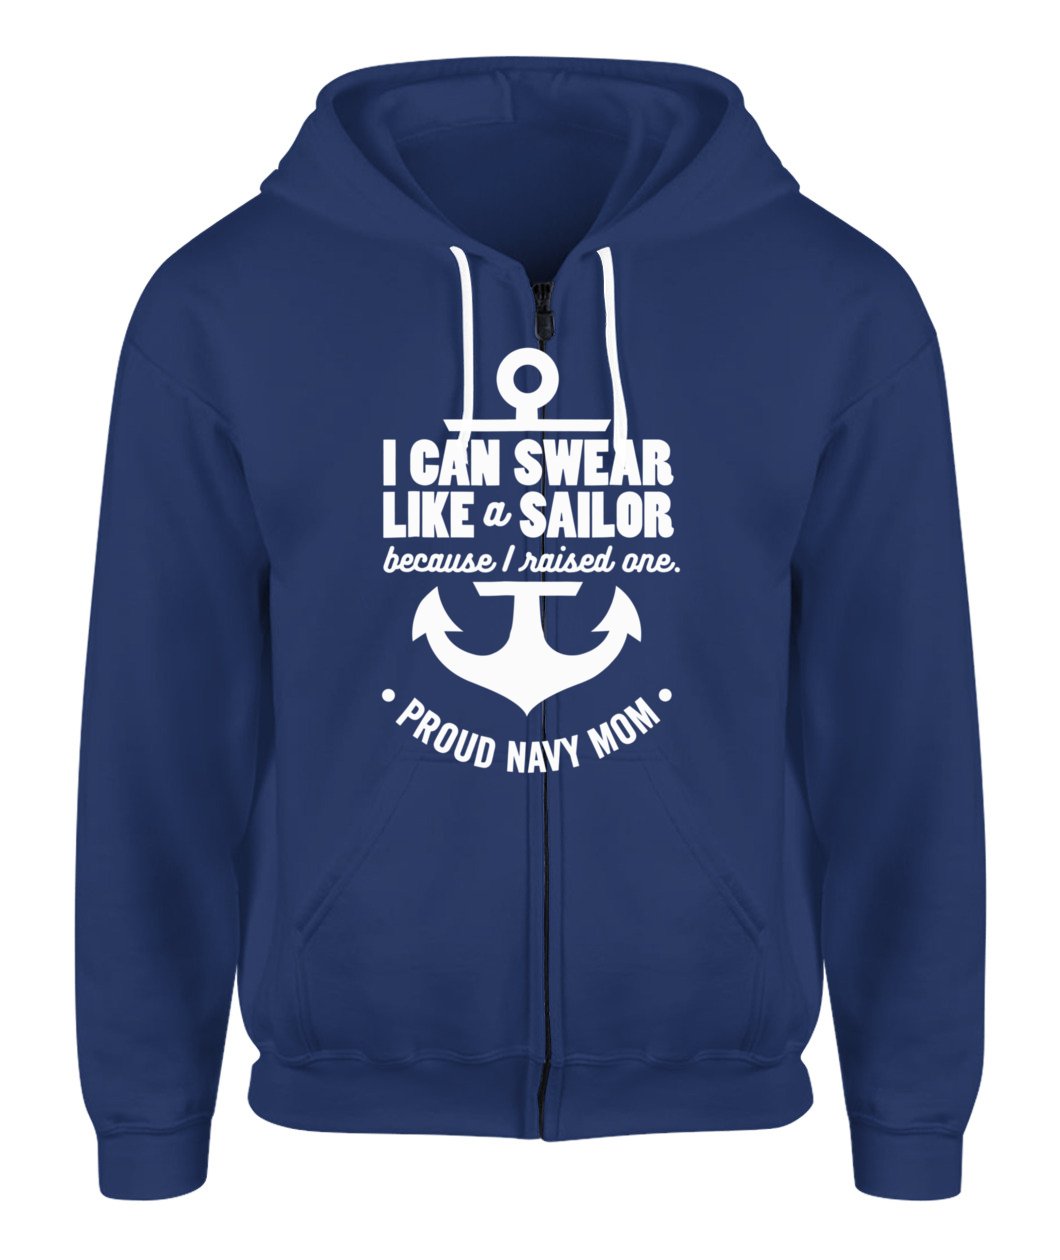 I Can Swear Like A Sailor Because I Raised One Navy Mom Zip Up Hoodie Intercept Inter National 